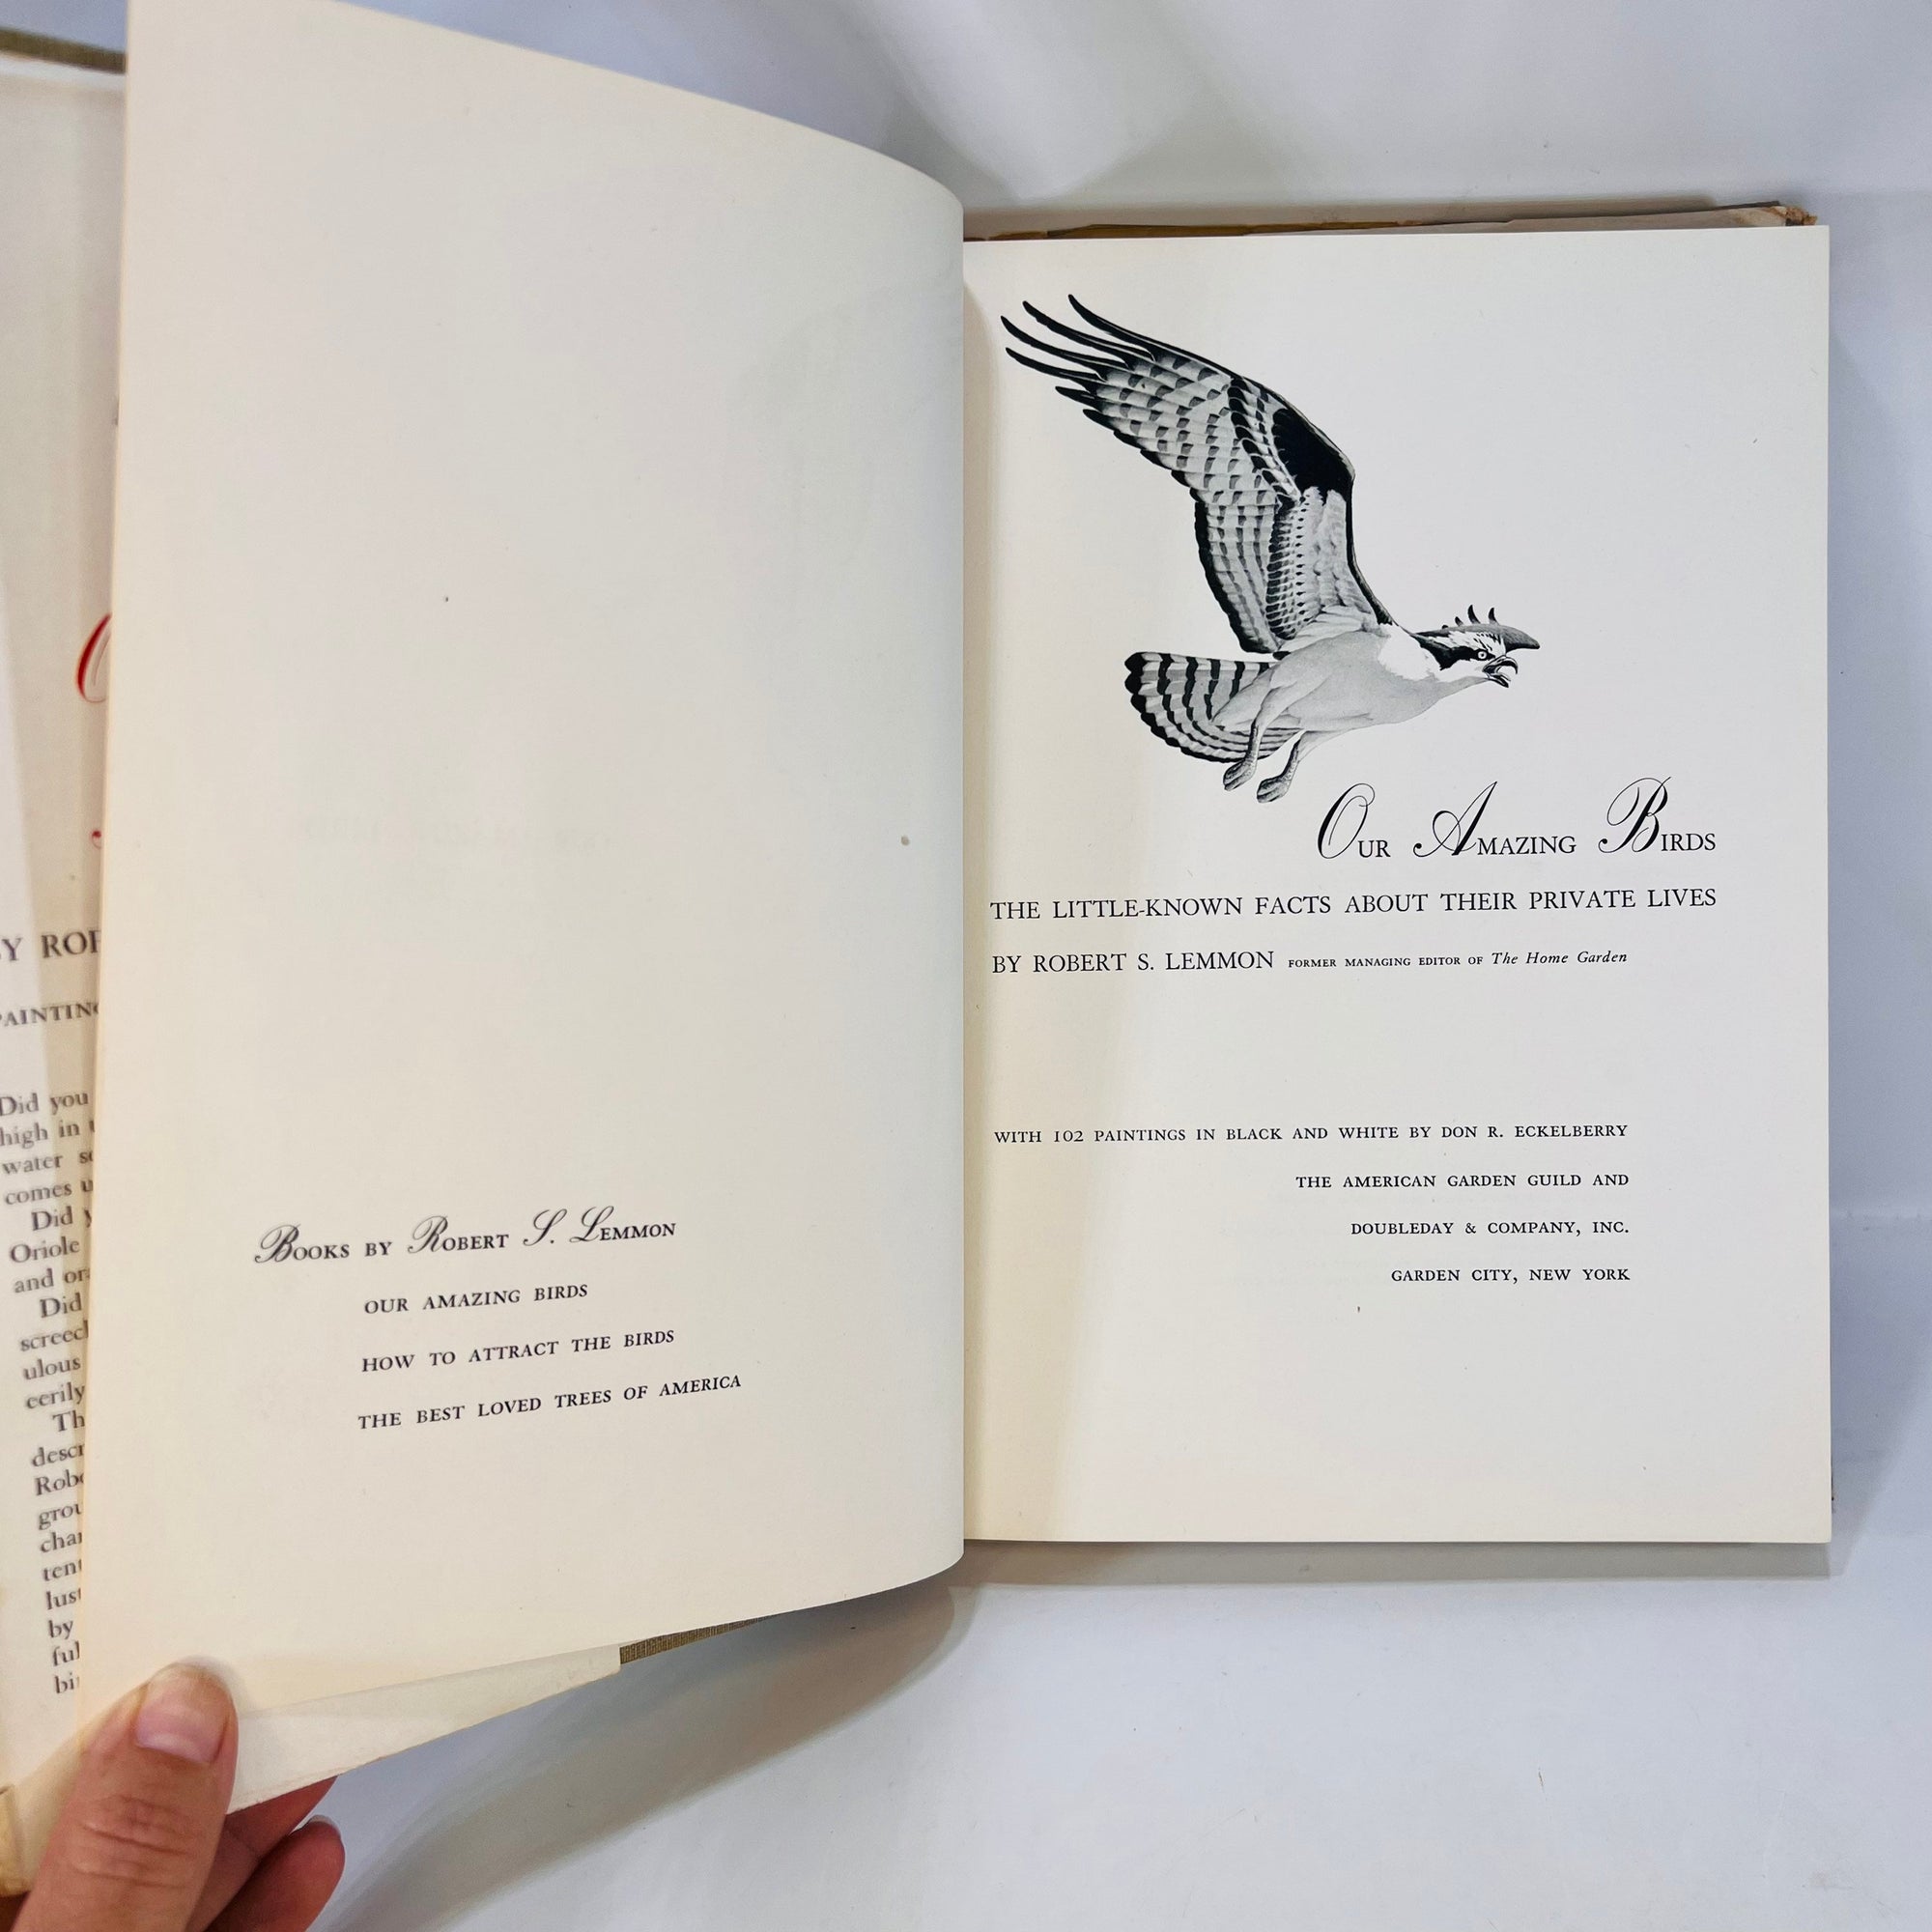 Our Amazing Birds little known facts about their private lives by Robert S. Lemon 1952 Odd and Interesting Data of 102 Birds Double Day Pub